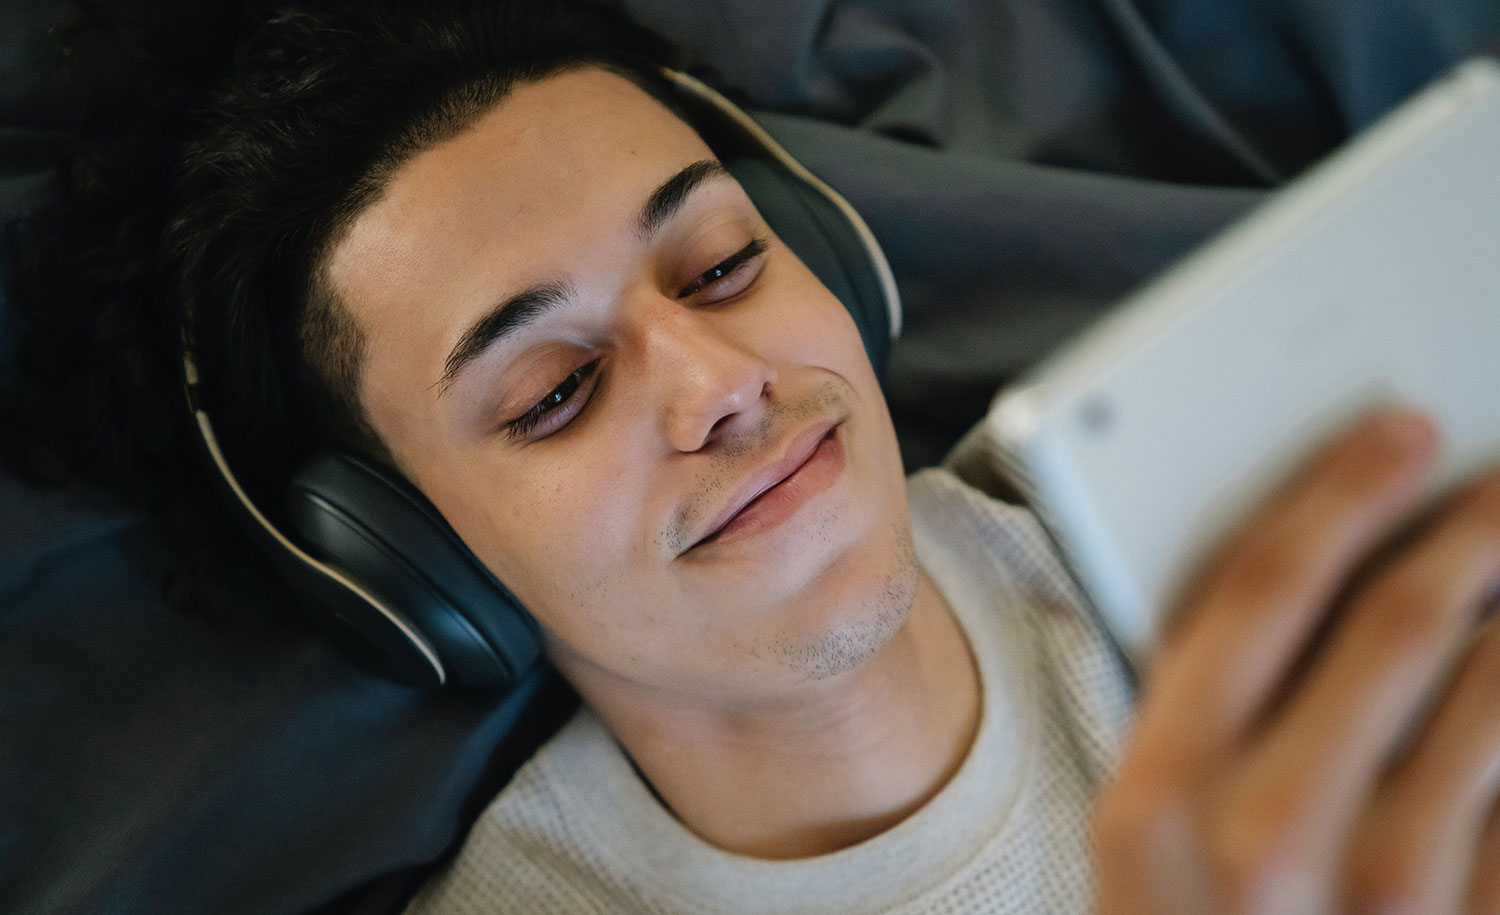 A highly sensitive person calms down by listening to headphones